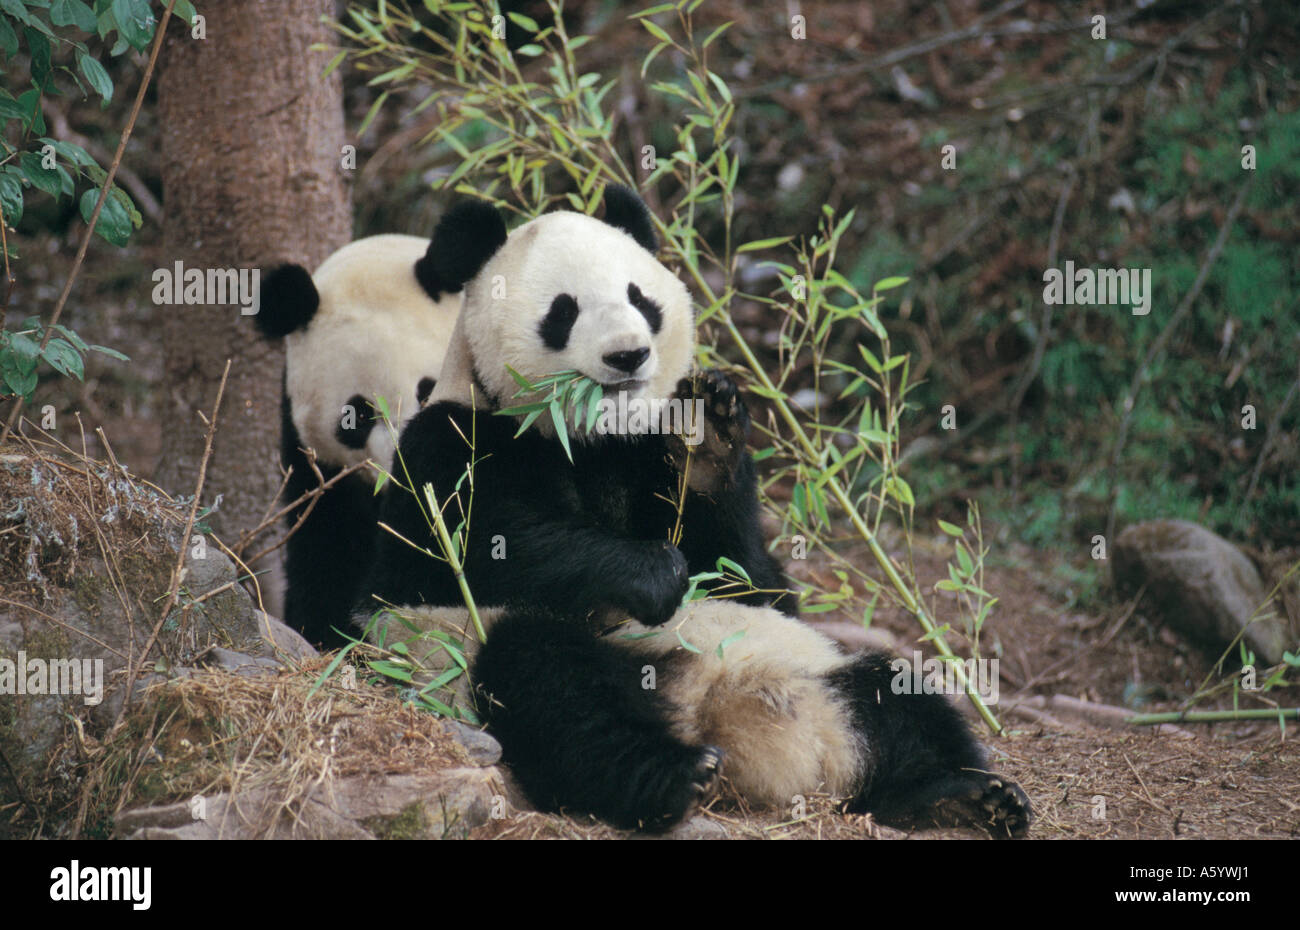 Two Giant Panda (Ailuropoda melanoleuca) resting in forest, Wolong National Nature Reserve, Sichuan Province, China Stock Photo